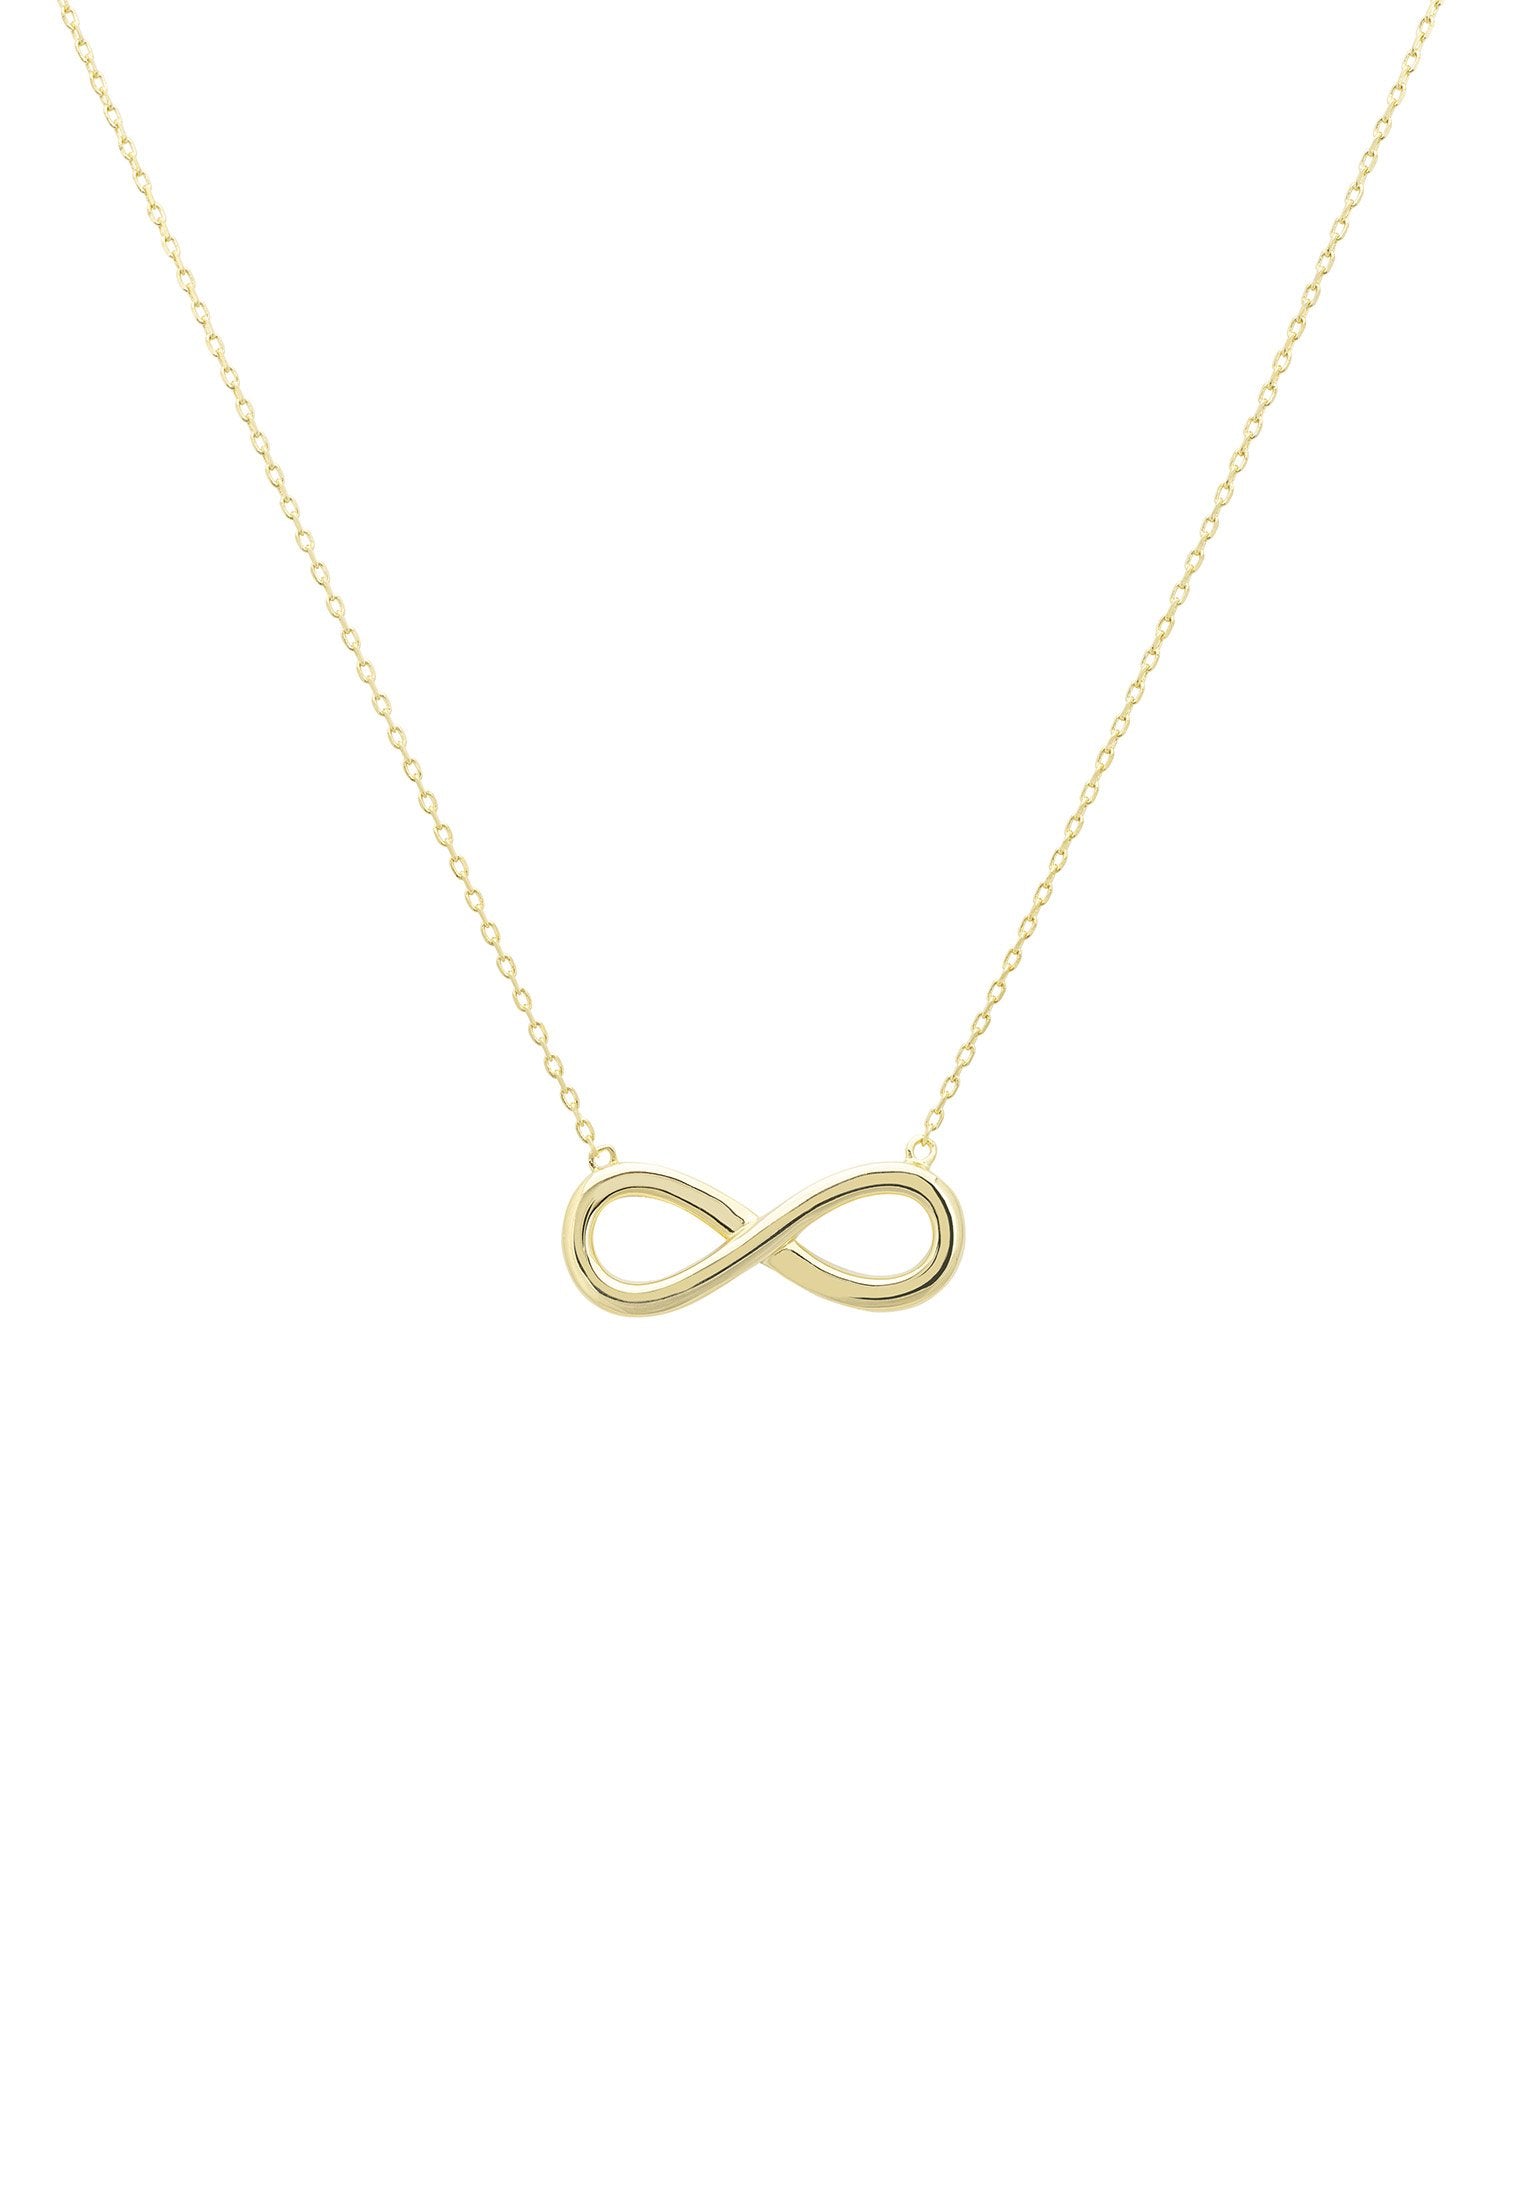 Eternal Love Necklace Gold Plated